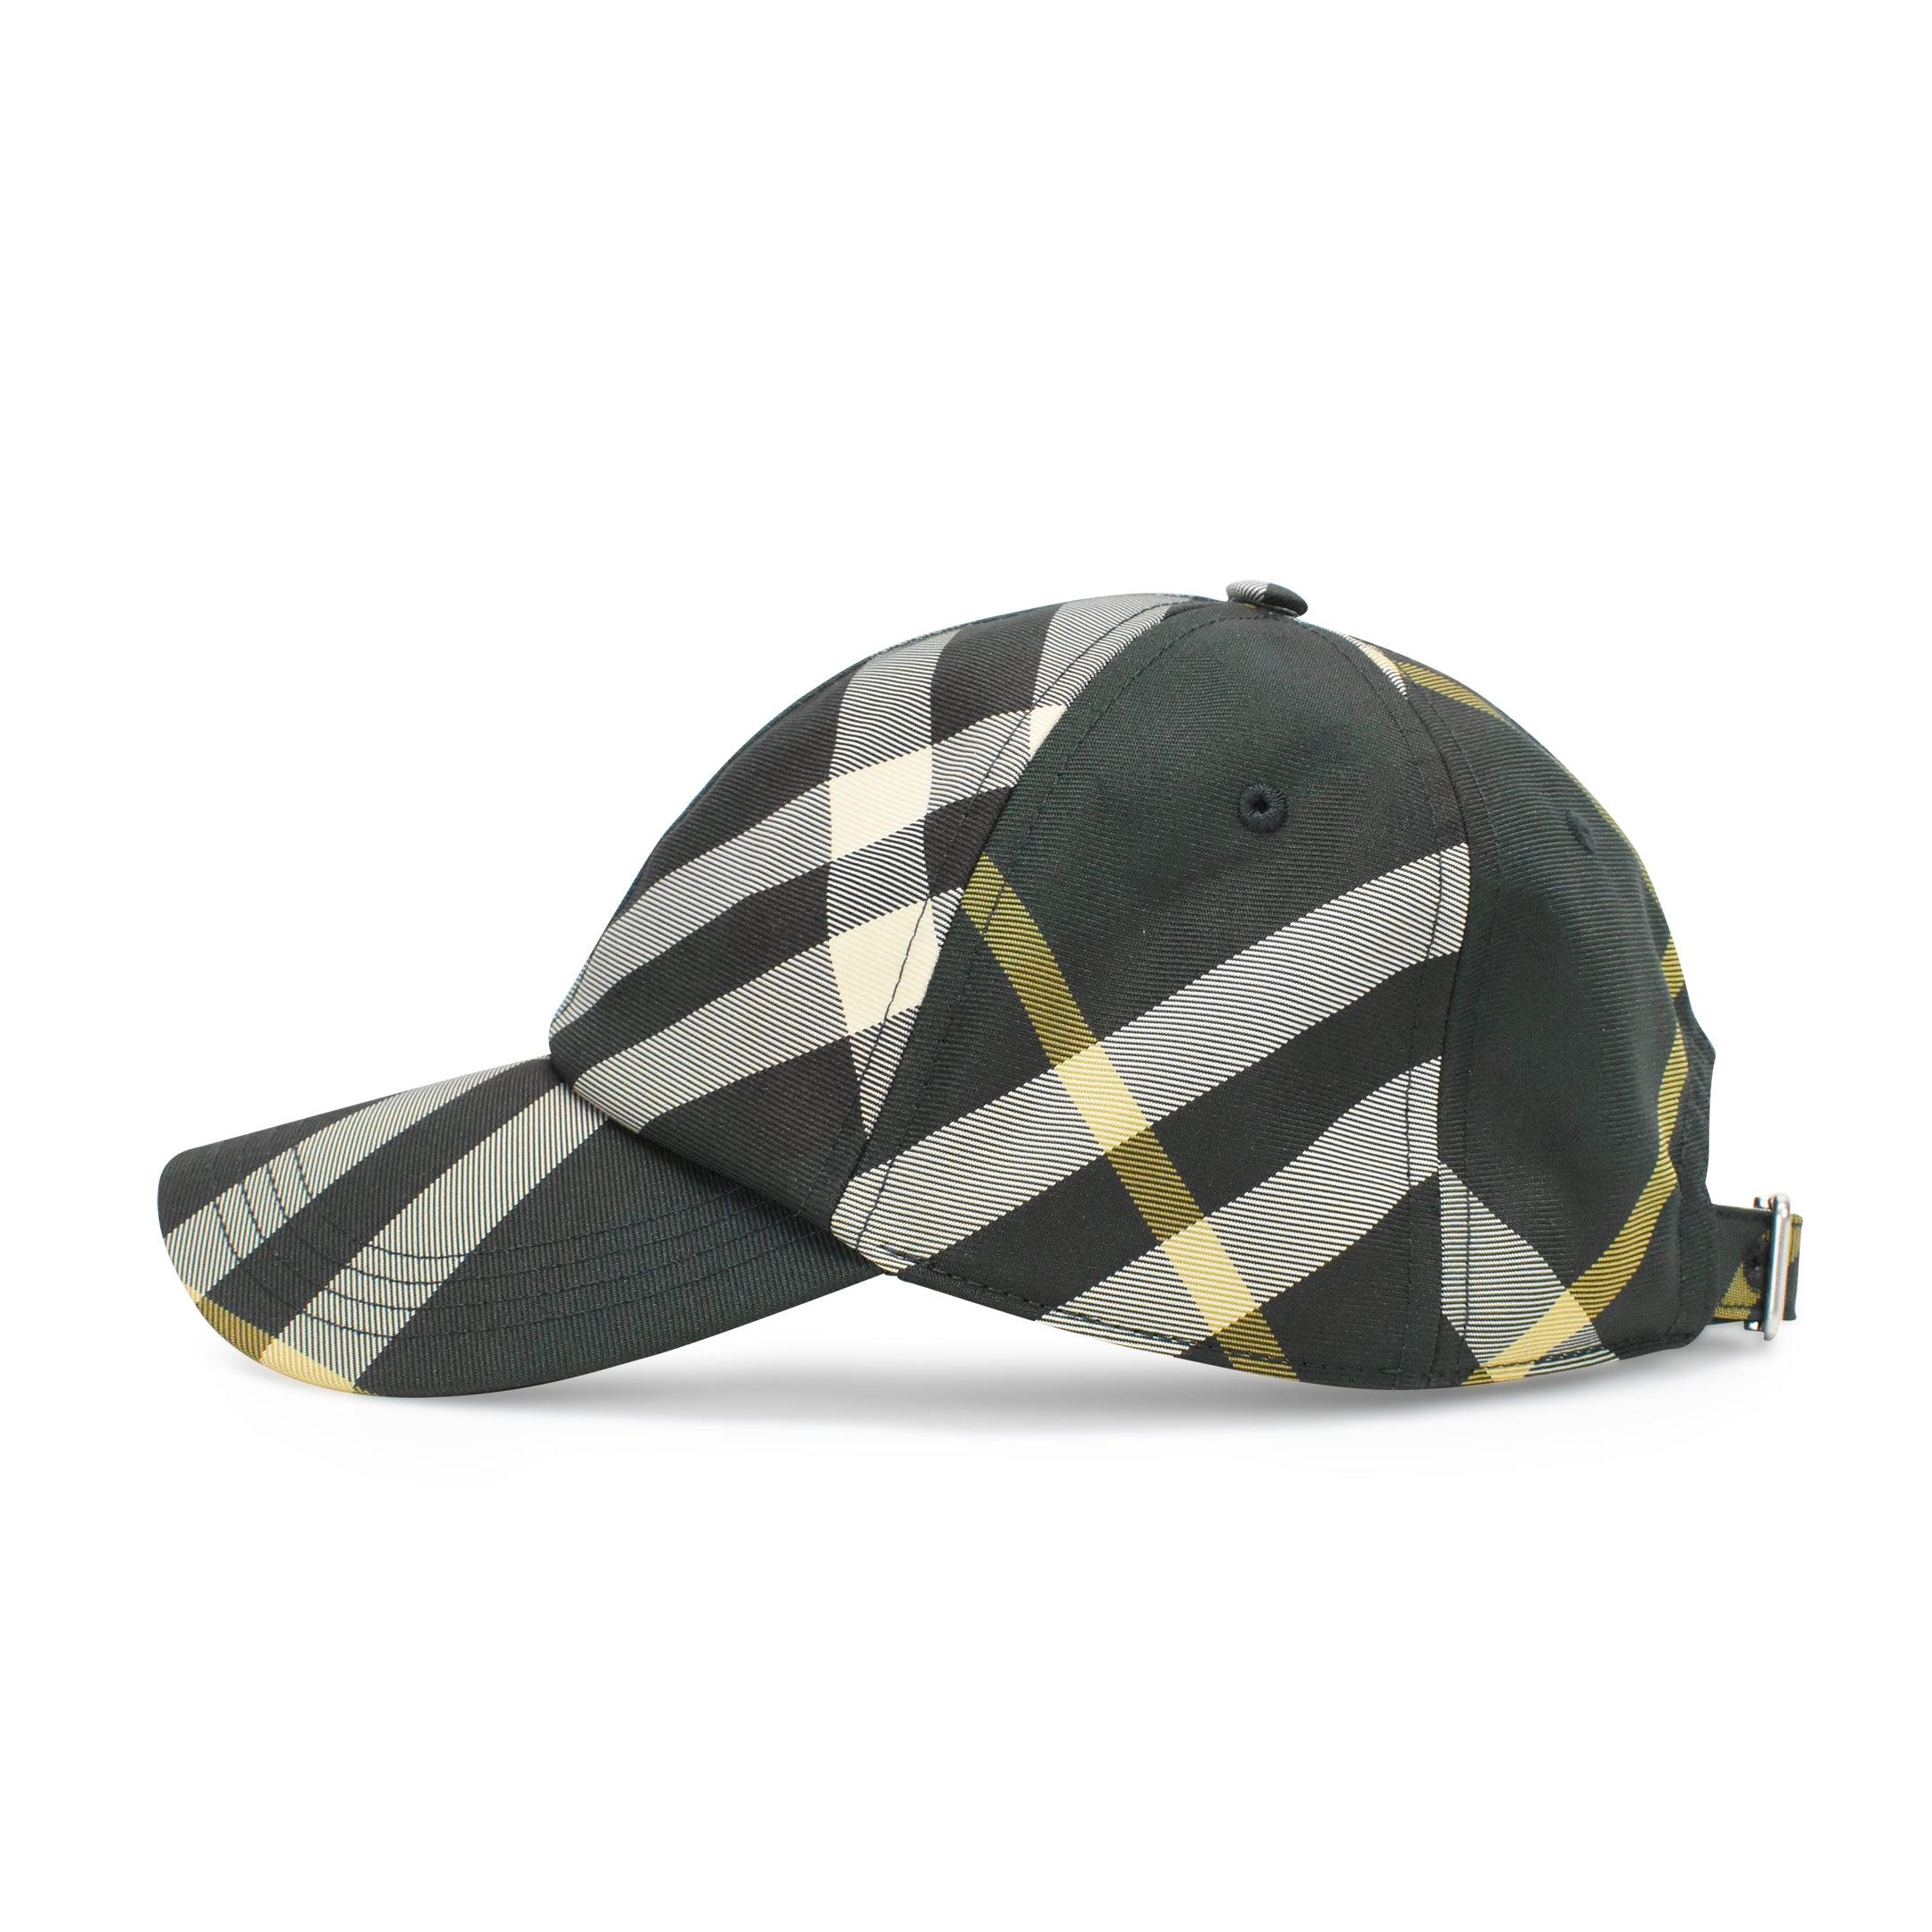 Burberry Baseball Cap - M - Fashionably Yours